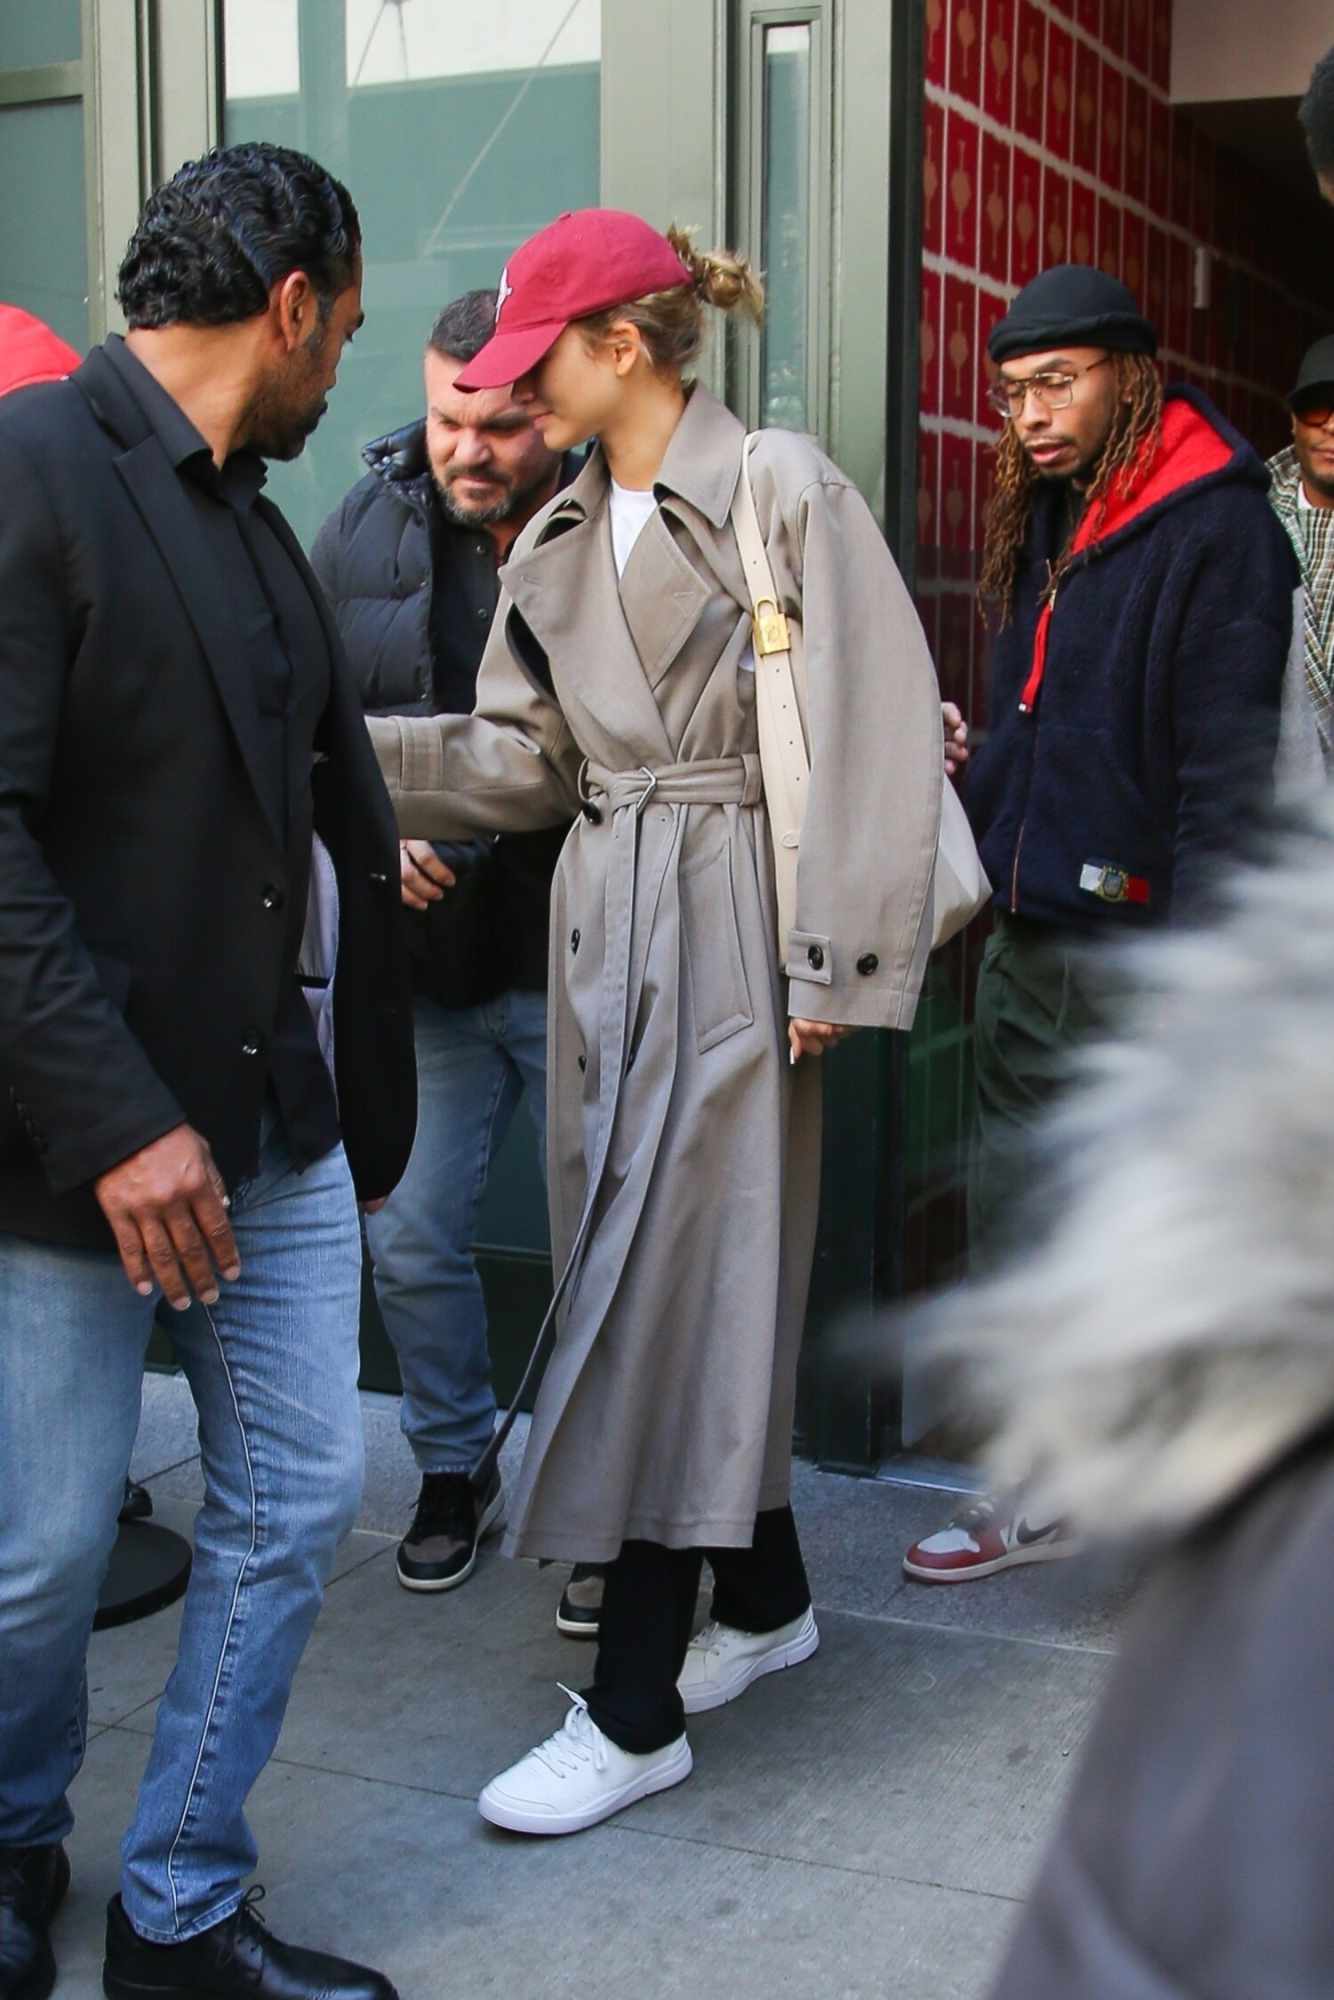 Zendaya wears a white Louis Vuitton bag, red hat, beige trench coat, black leggings, and white On Roger Federer sneakers